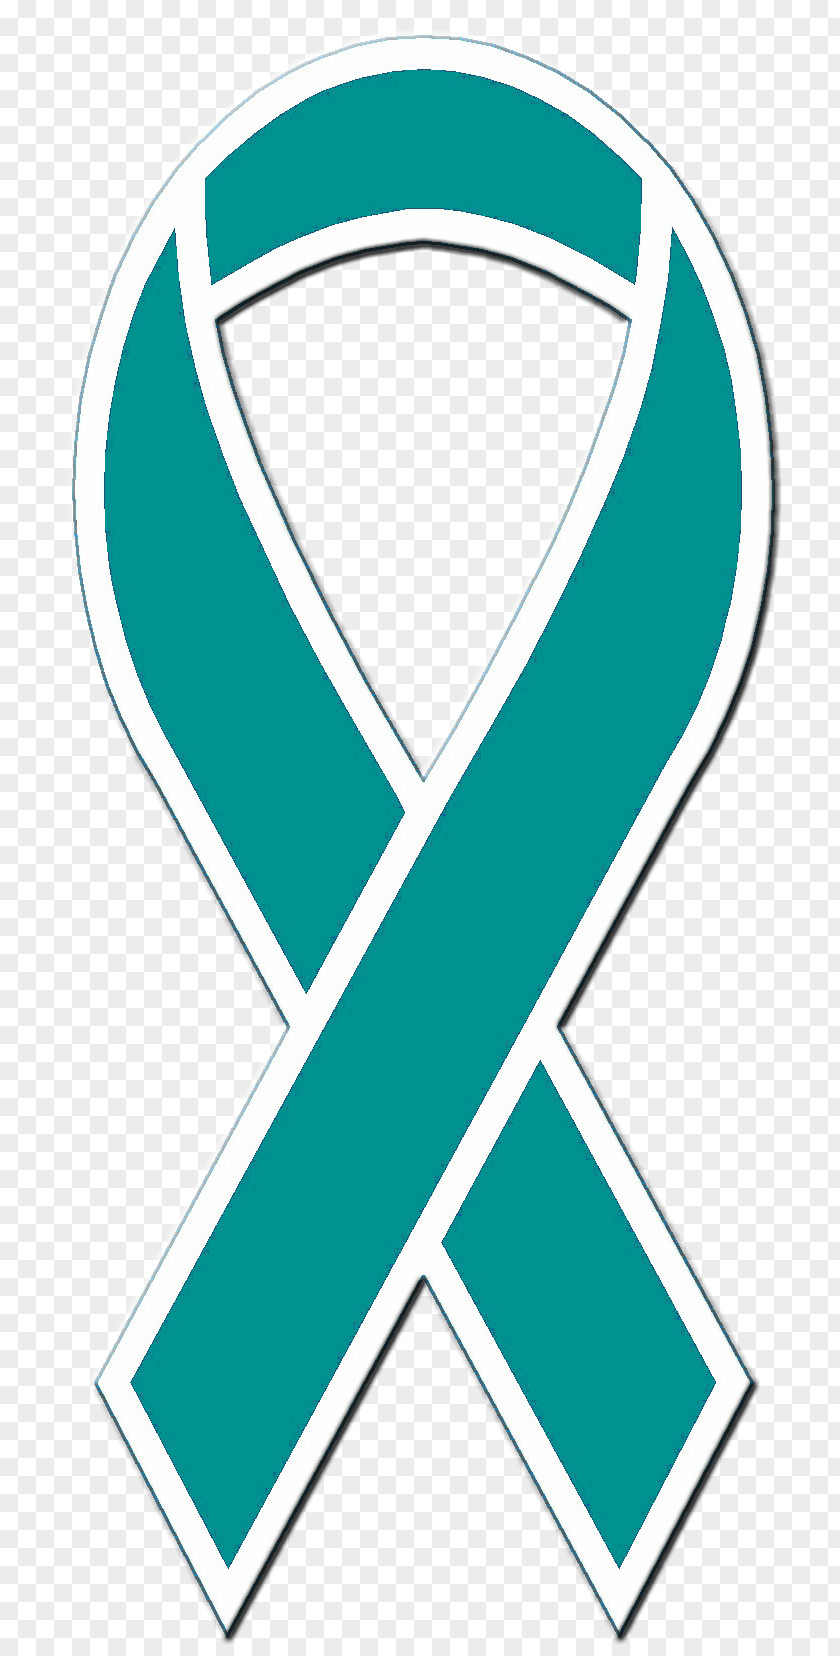 Teal Epidemiology Of HIV/AIDS Awareness Ribbon Red PNG